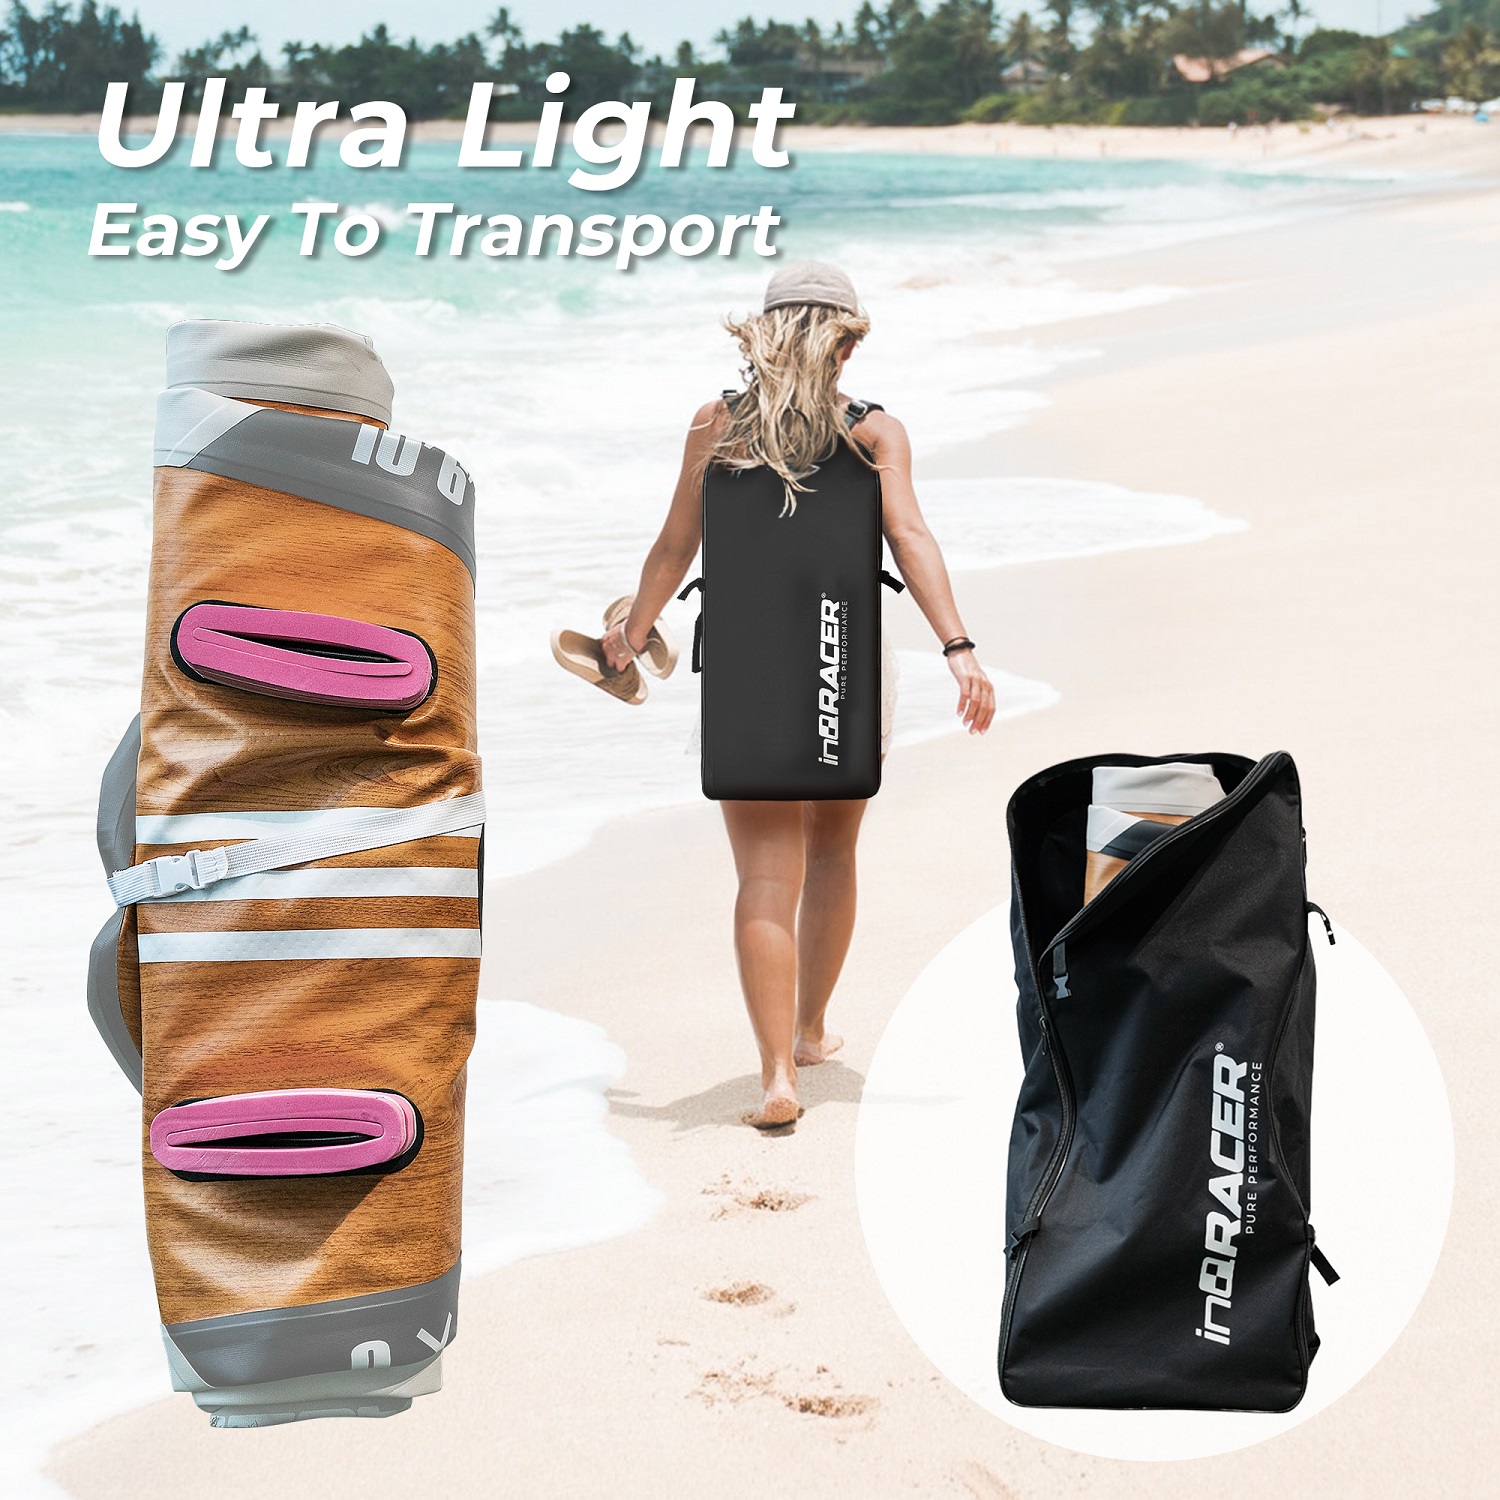 10'6'' X33''X6'' Inflatable Stand Up Paddle Board